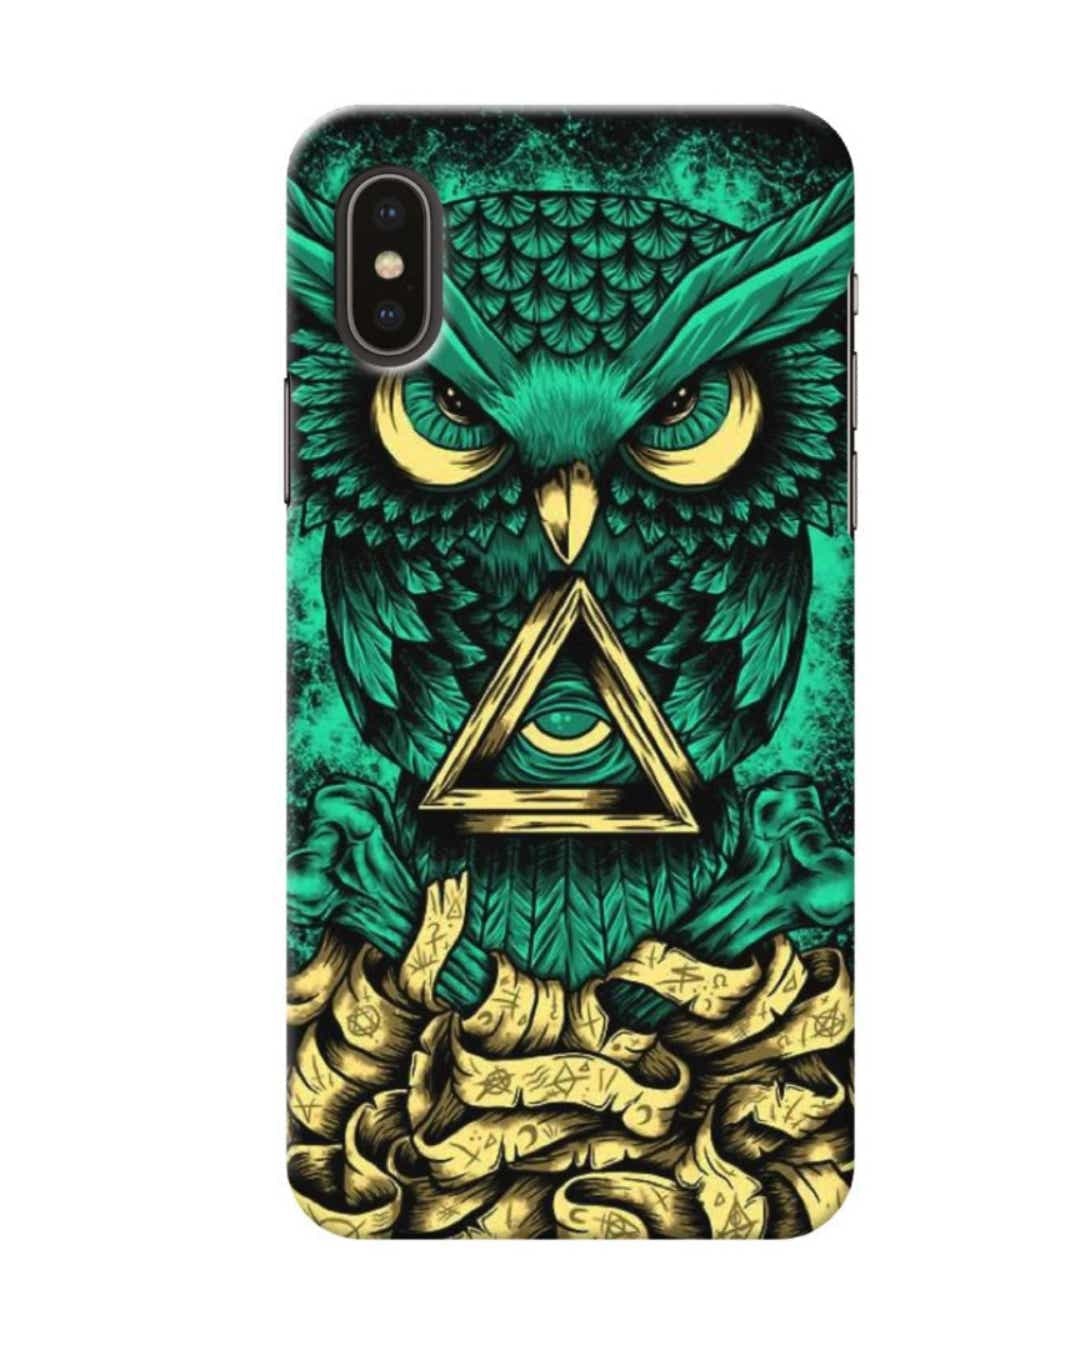 Shop Green Owl Printed Designer Hard Cover For iPhone XS Max (Impact Resistant, Matte Finish)-Front